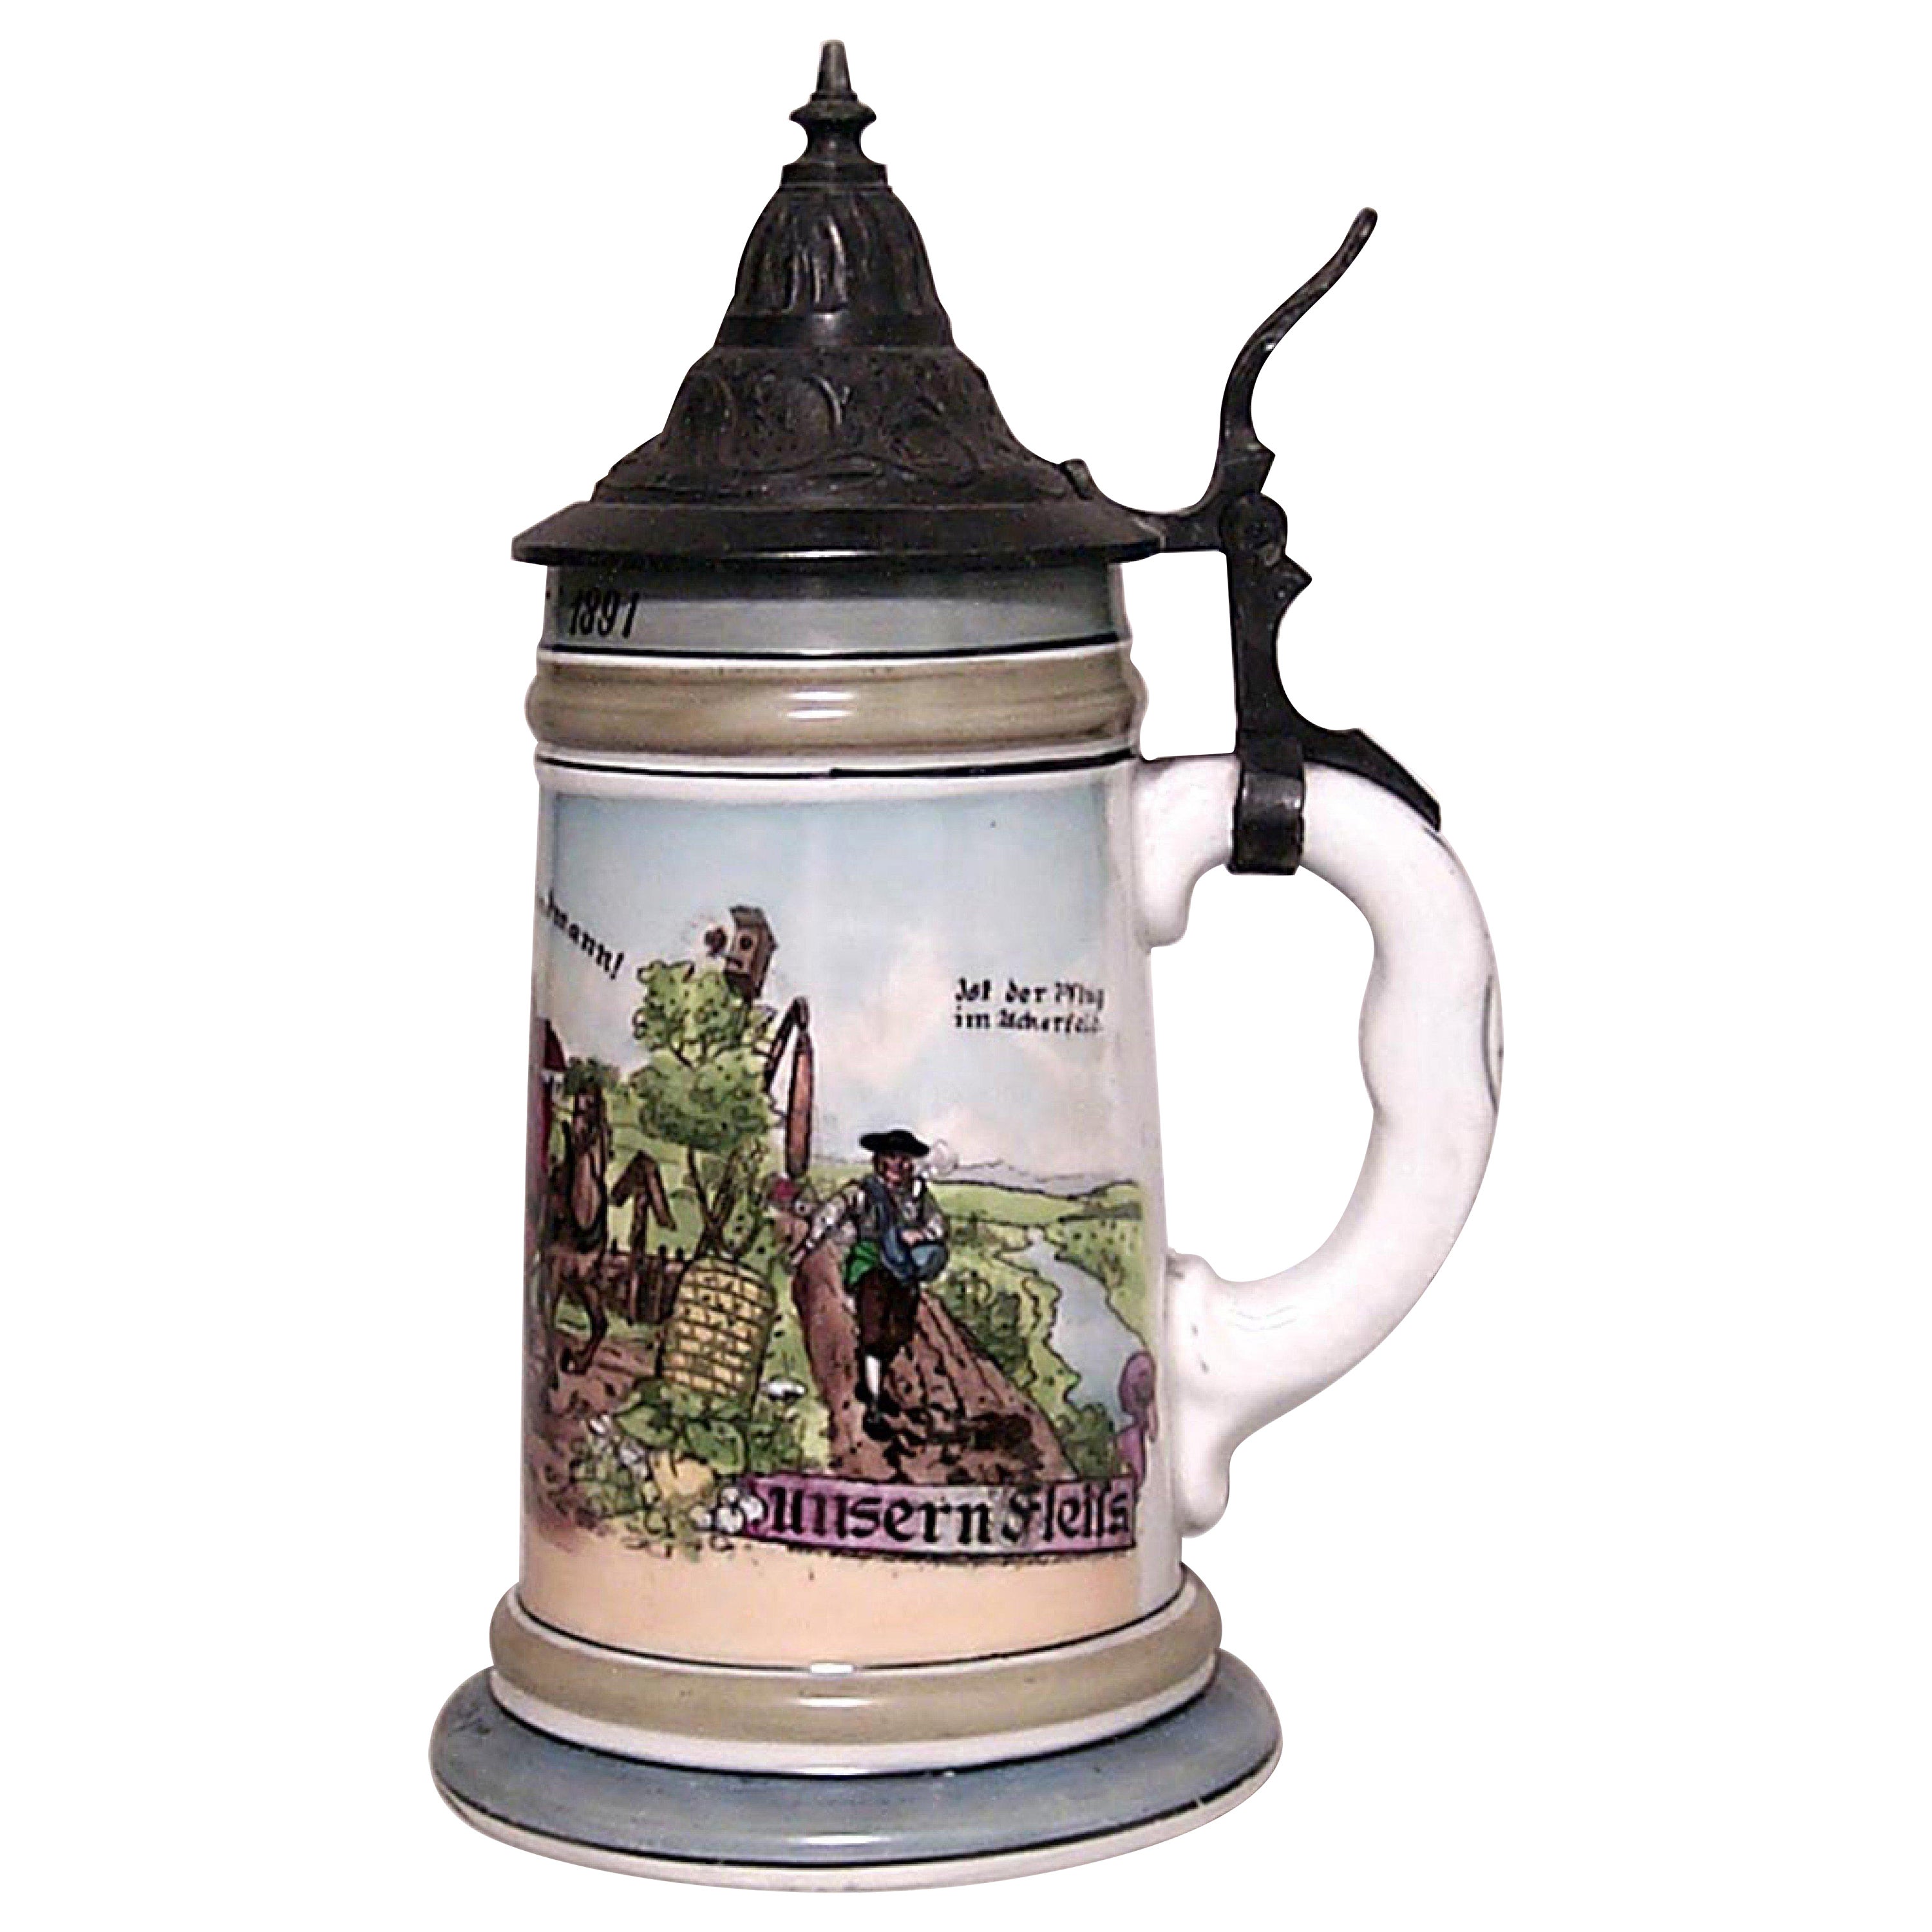 German Porcelain and Pewter Beer Stein For Sale